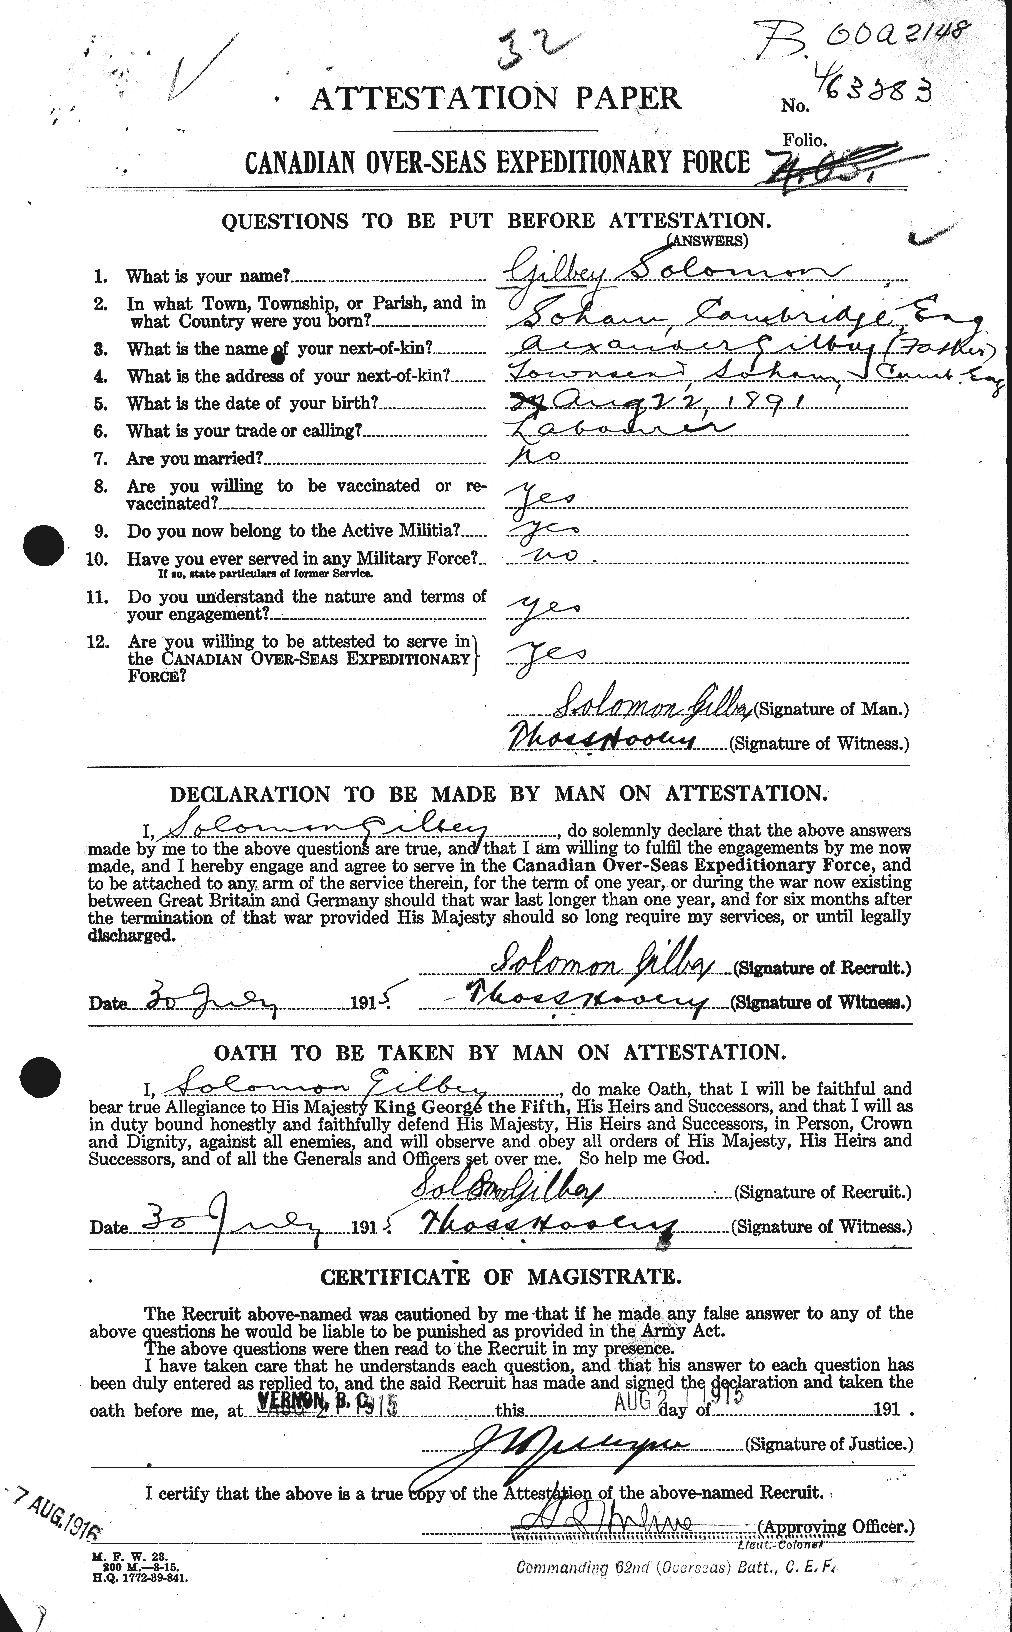 Personnel Records of the First World War - CEF 352582a